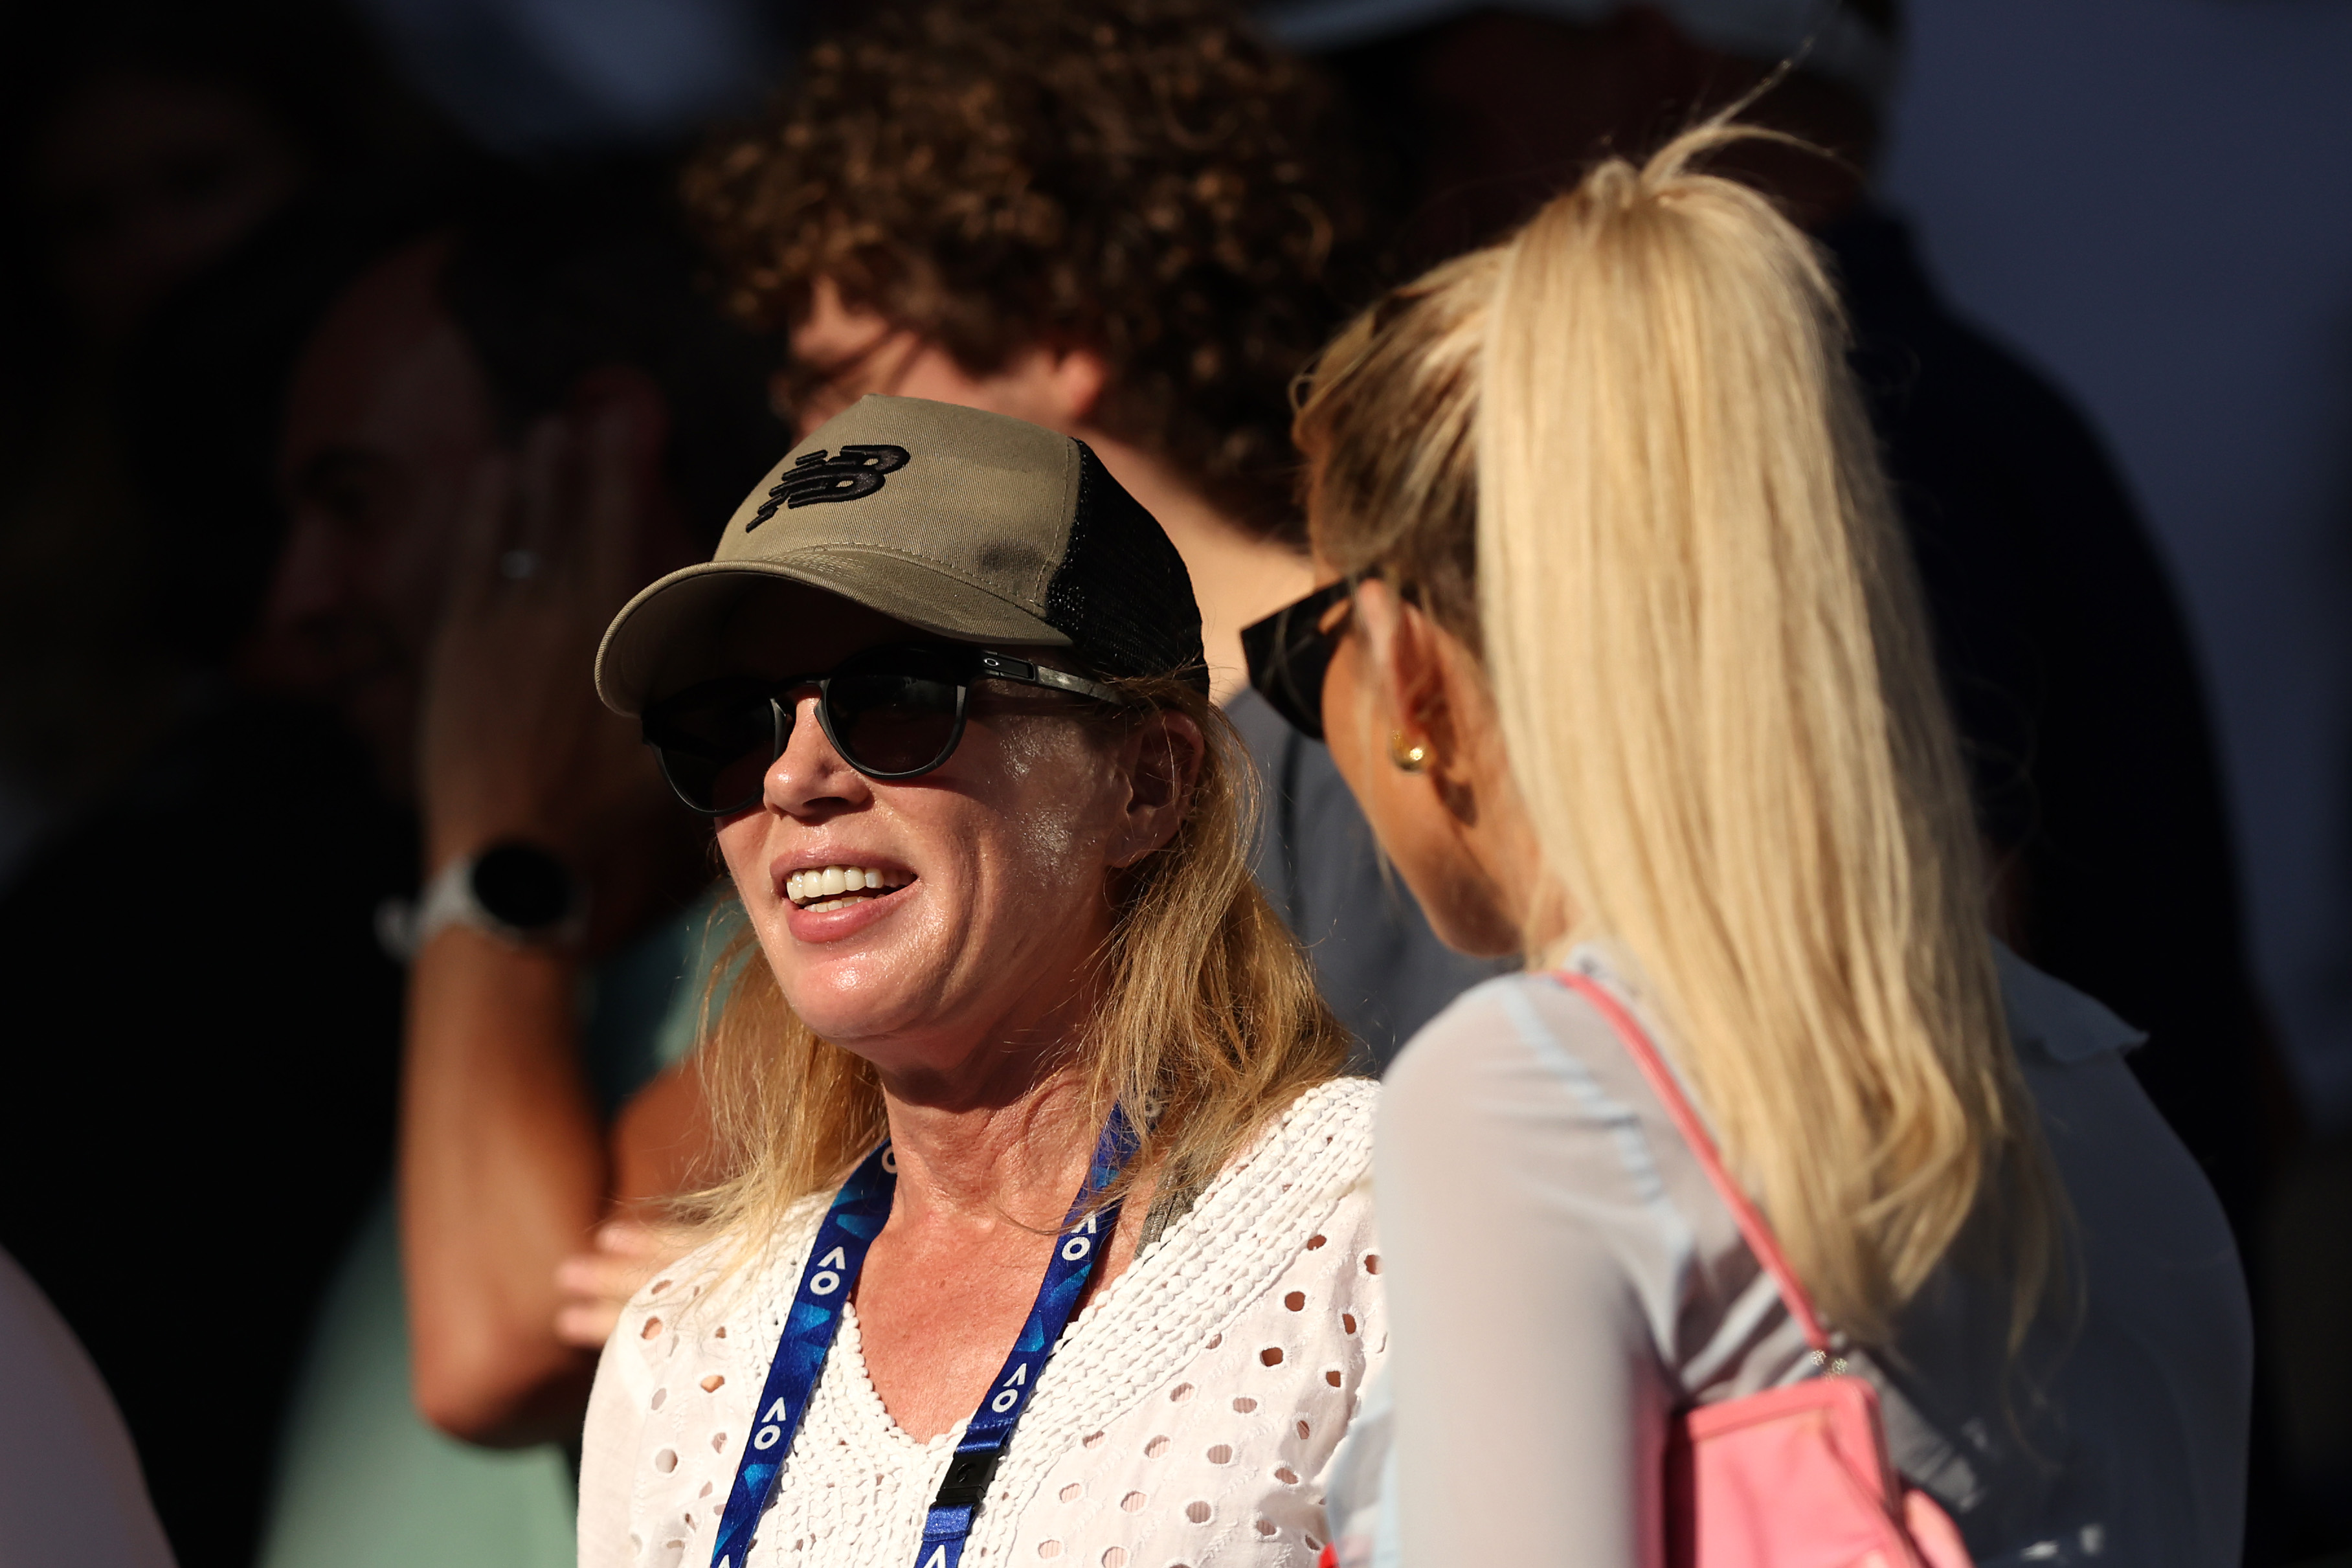 Jill MacMillan watches the quarterfinal singles match between Ben Shelton and Tommy Paul during day ten of the 2023 Australian Open at Melbourne Park on January 25, 2023, in Melbourne, Australia. | Source: Getty Images